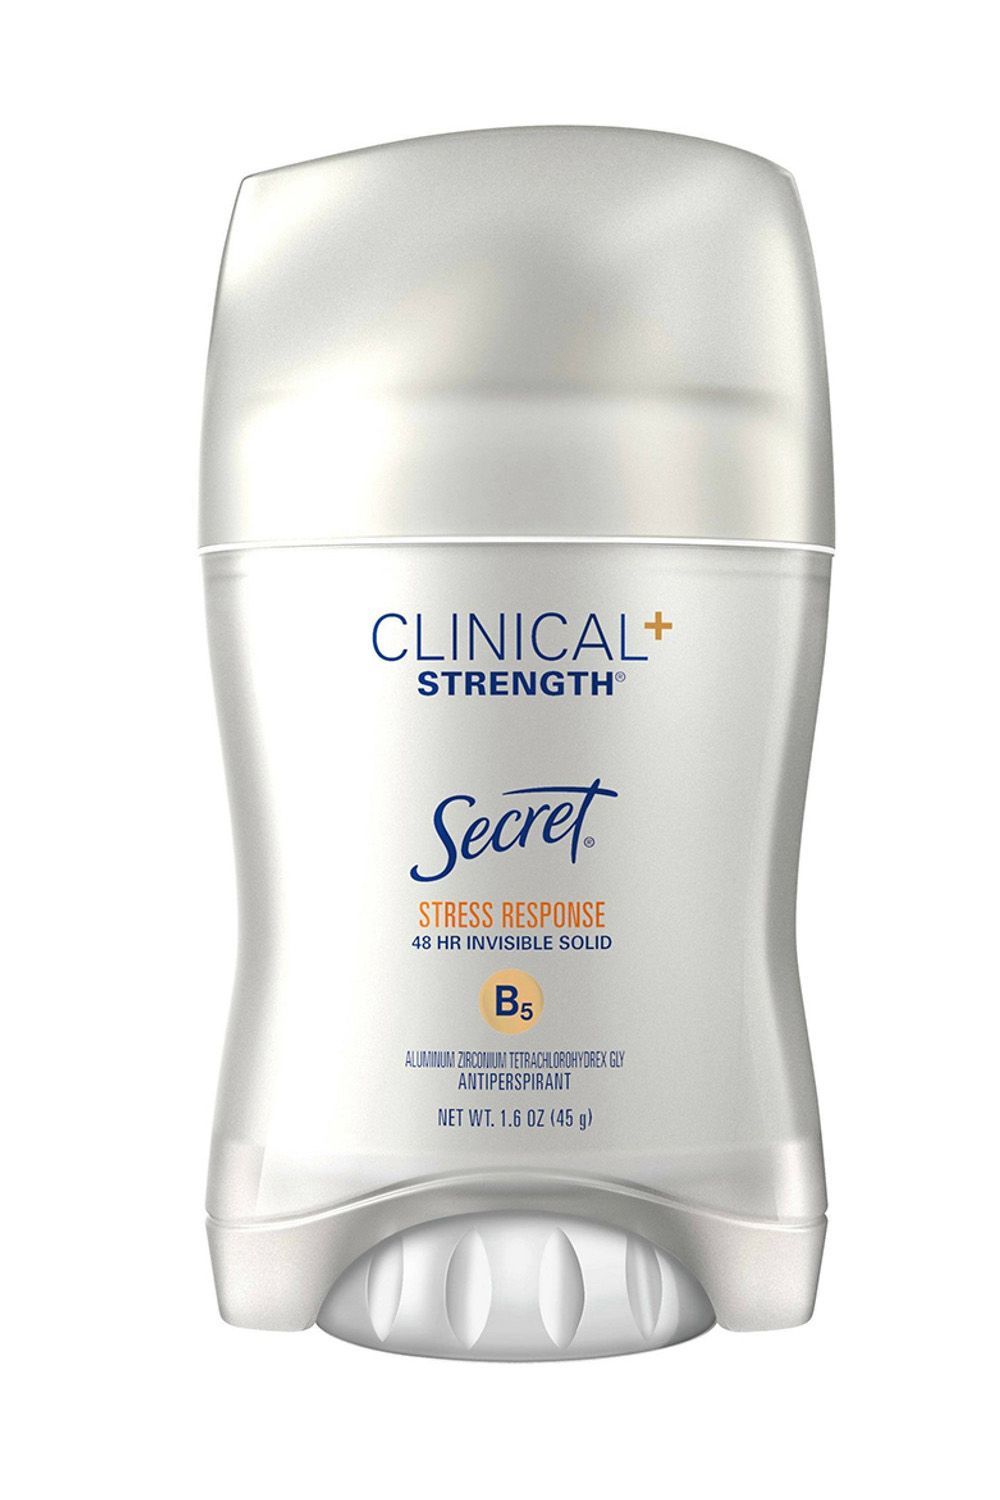 Secret Clinical Strength Stress Response 48 HR Invisible Solid